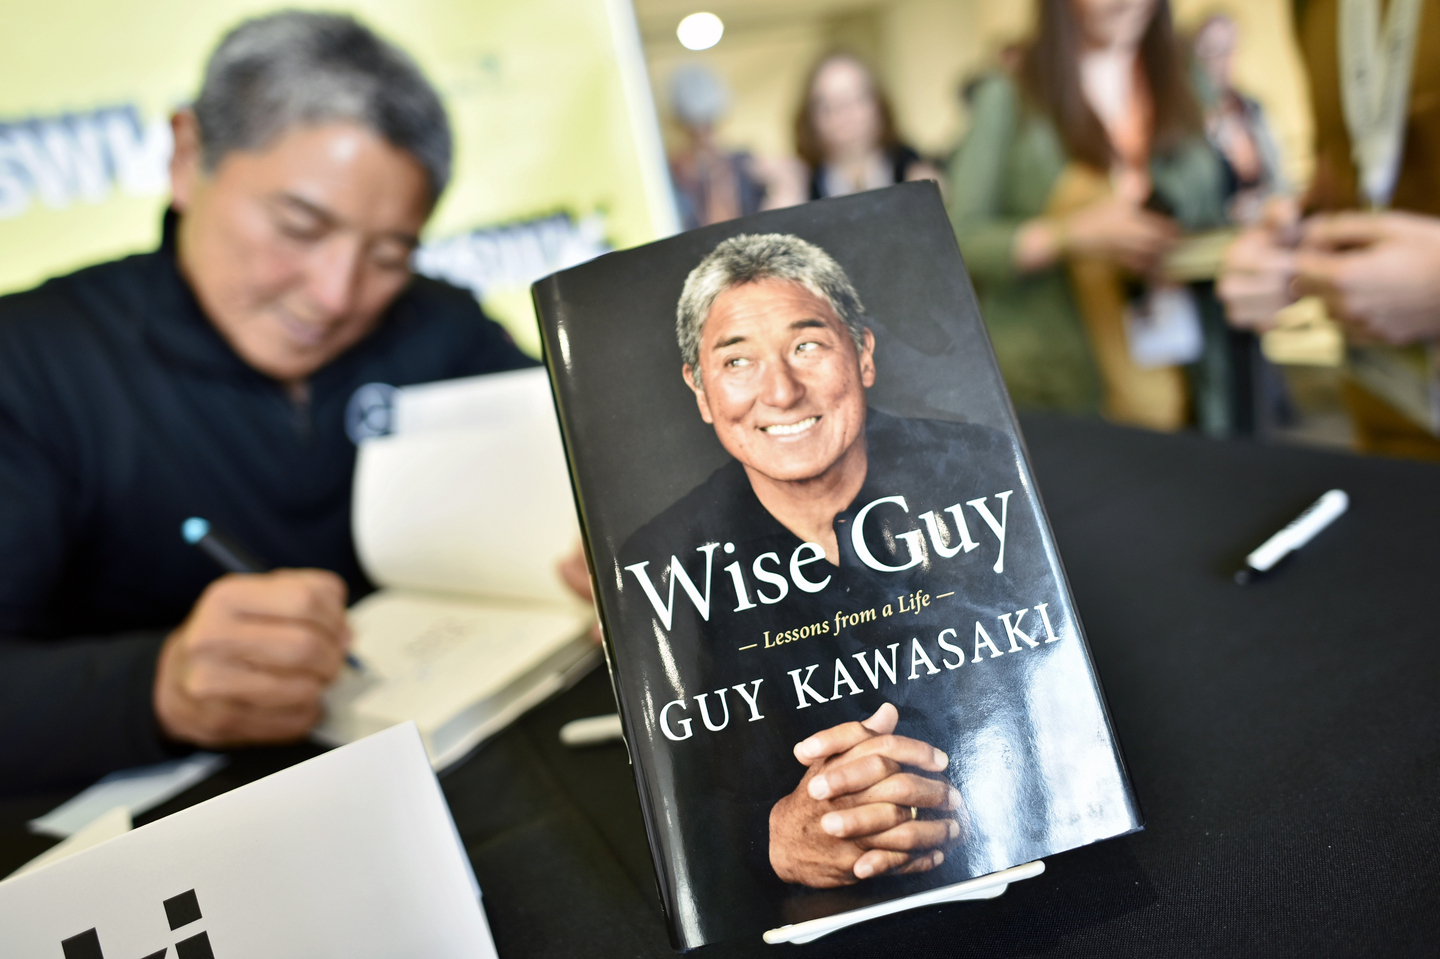 Guy Kawasaki at his Wise Guy - Lessons from Tech, Startups, and Silicon Valley book signing – Photo by Chris Saucedo/Getty Images for SXSW